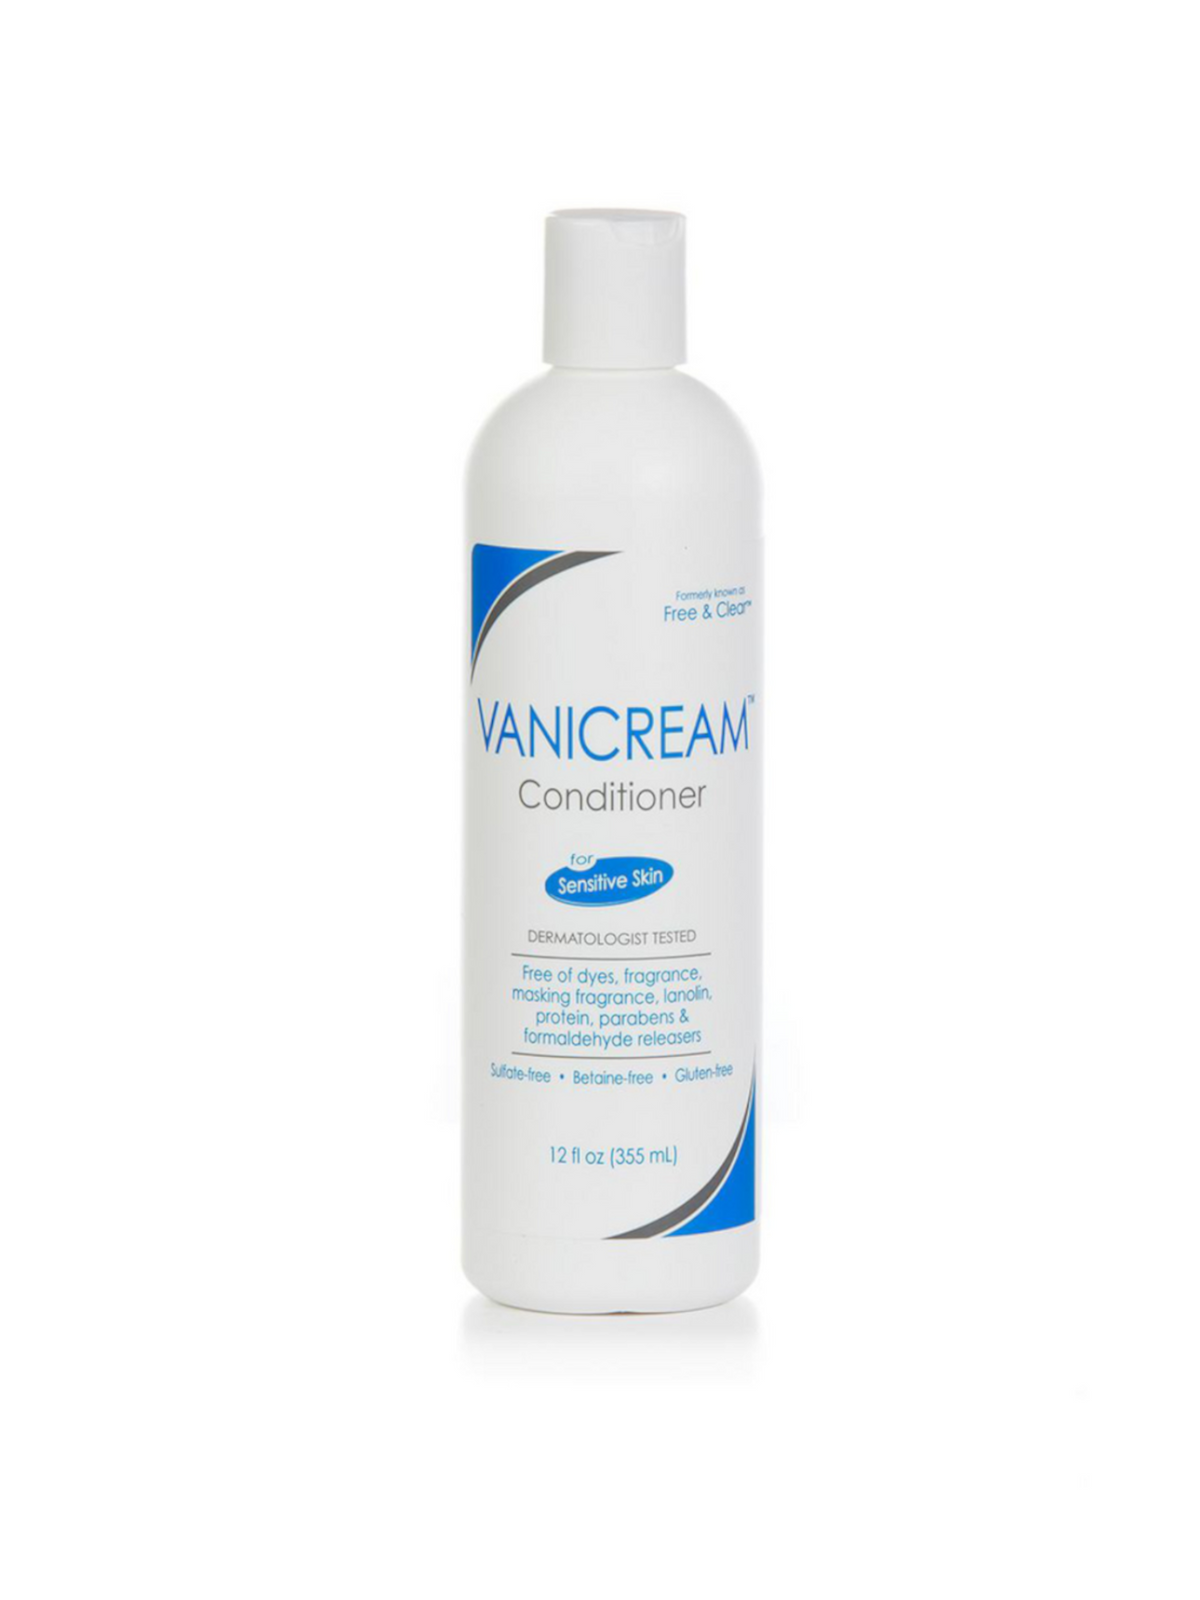 Free and Clear hair conditioner